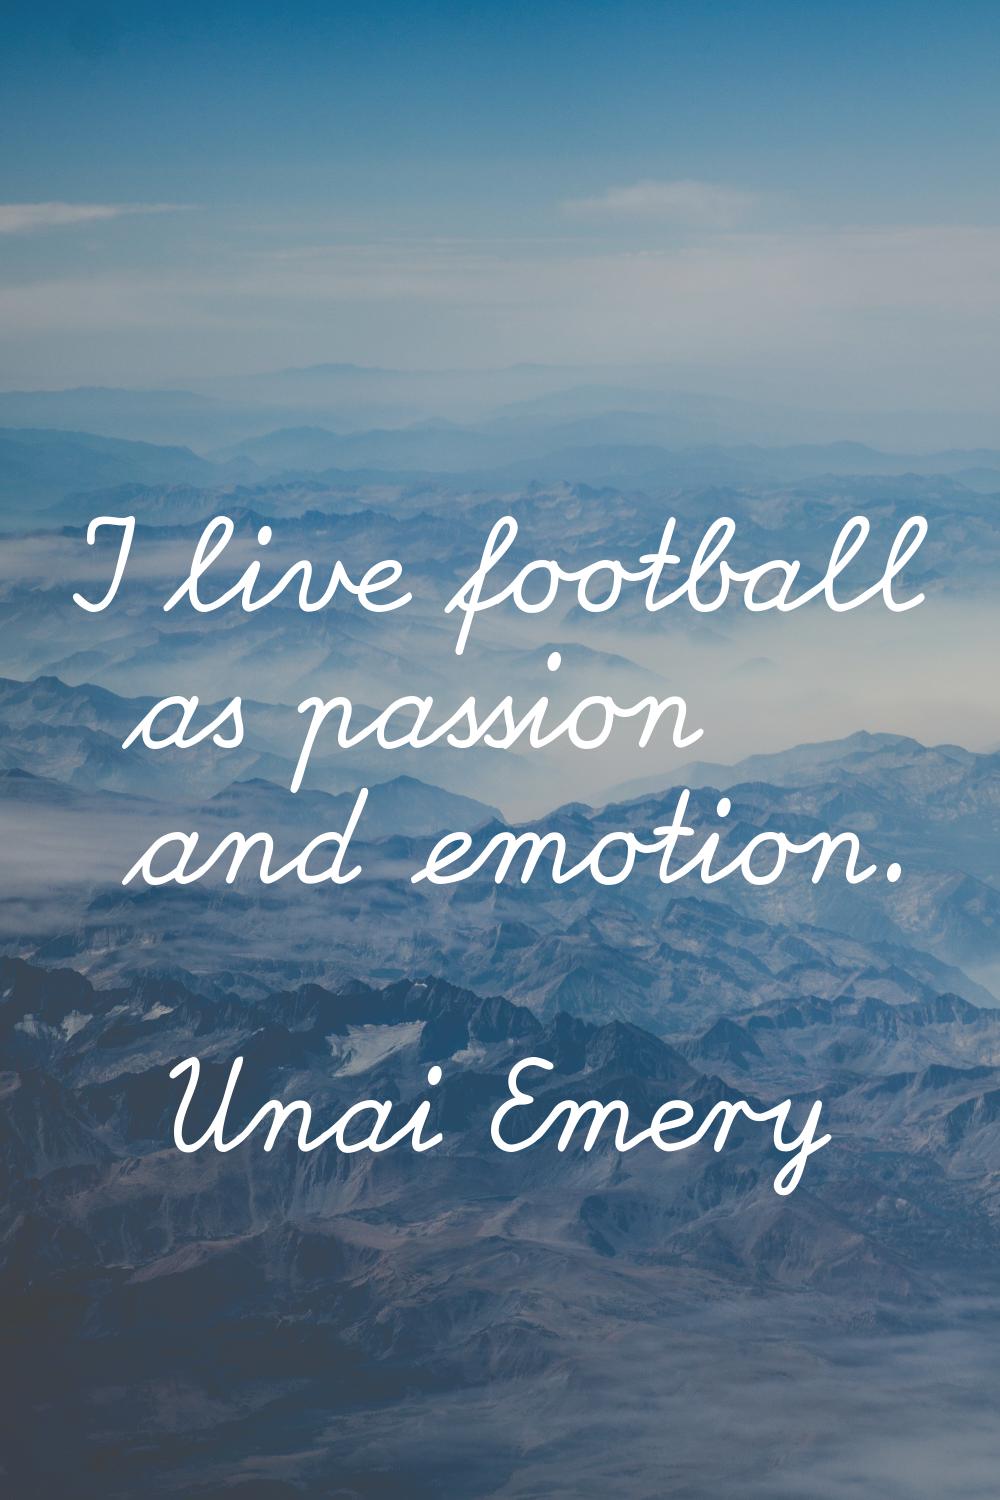 I live football as passion and emotion.